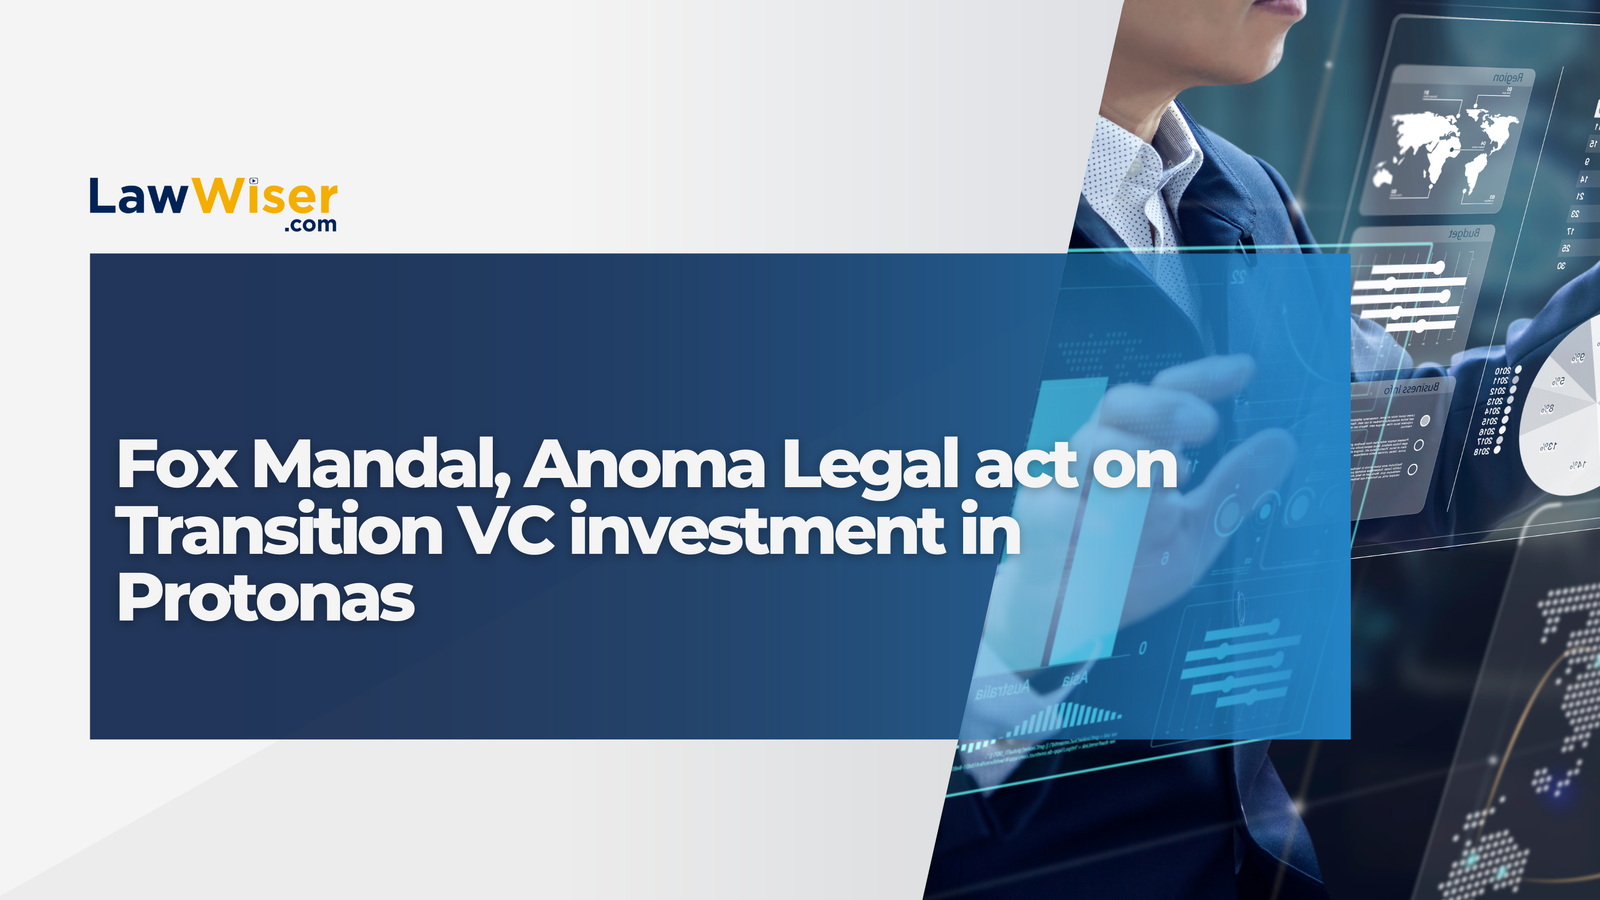 Fox Mandal, Anoma Legal act on Transition VC investment in Protonas